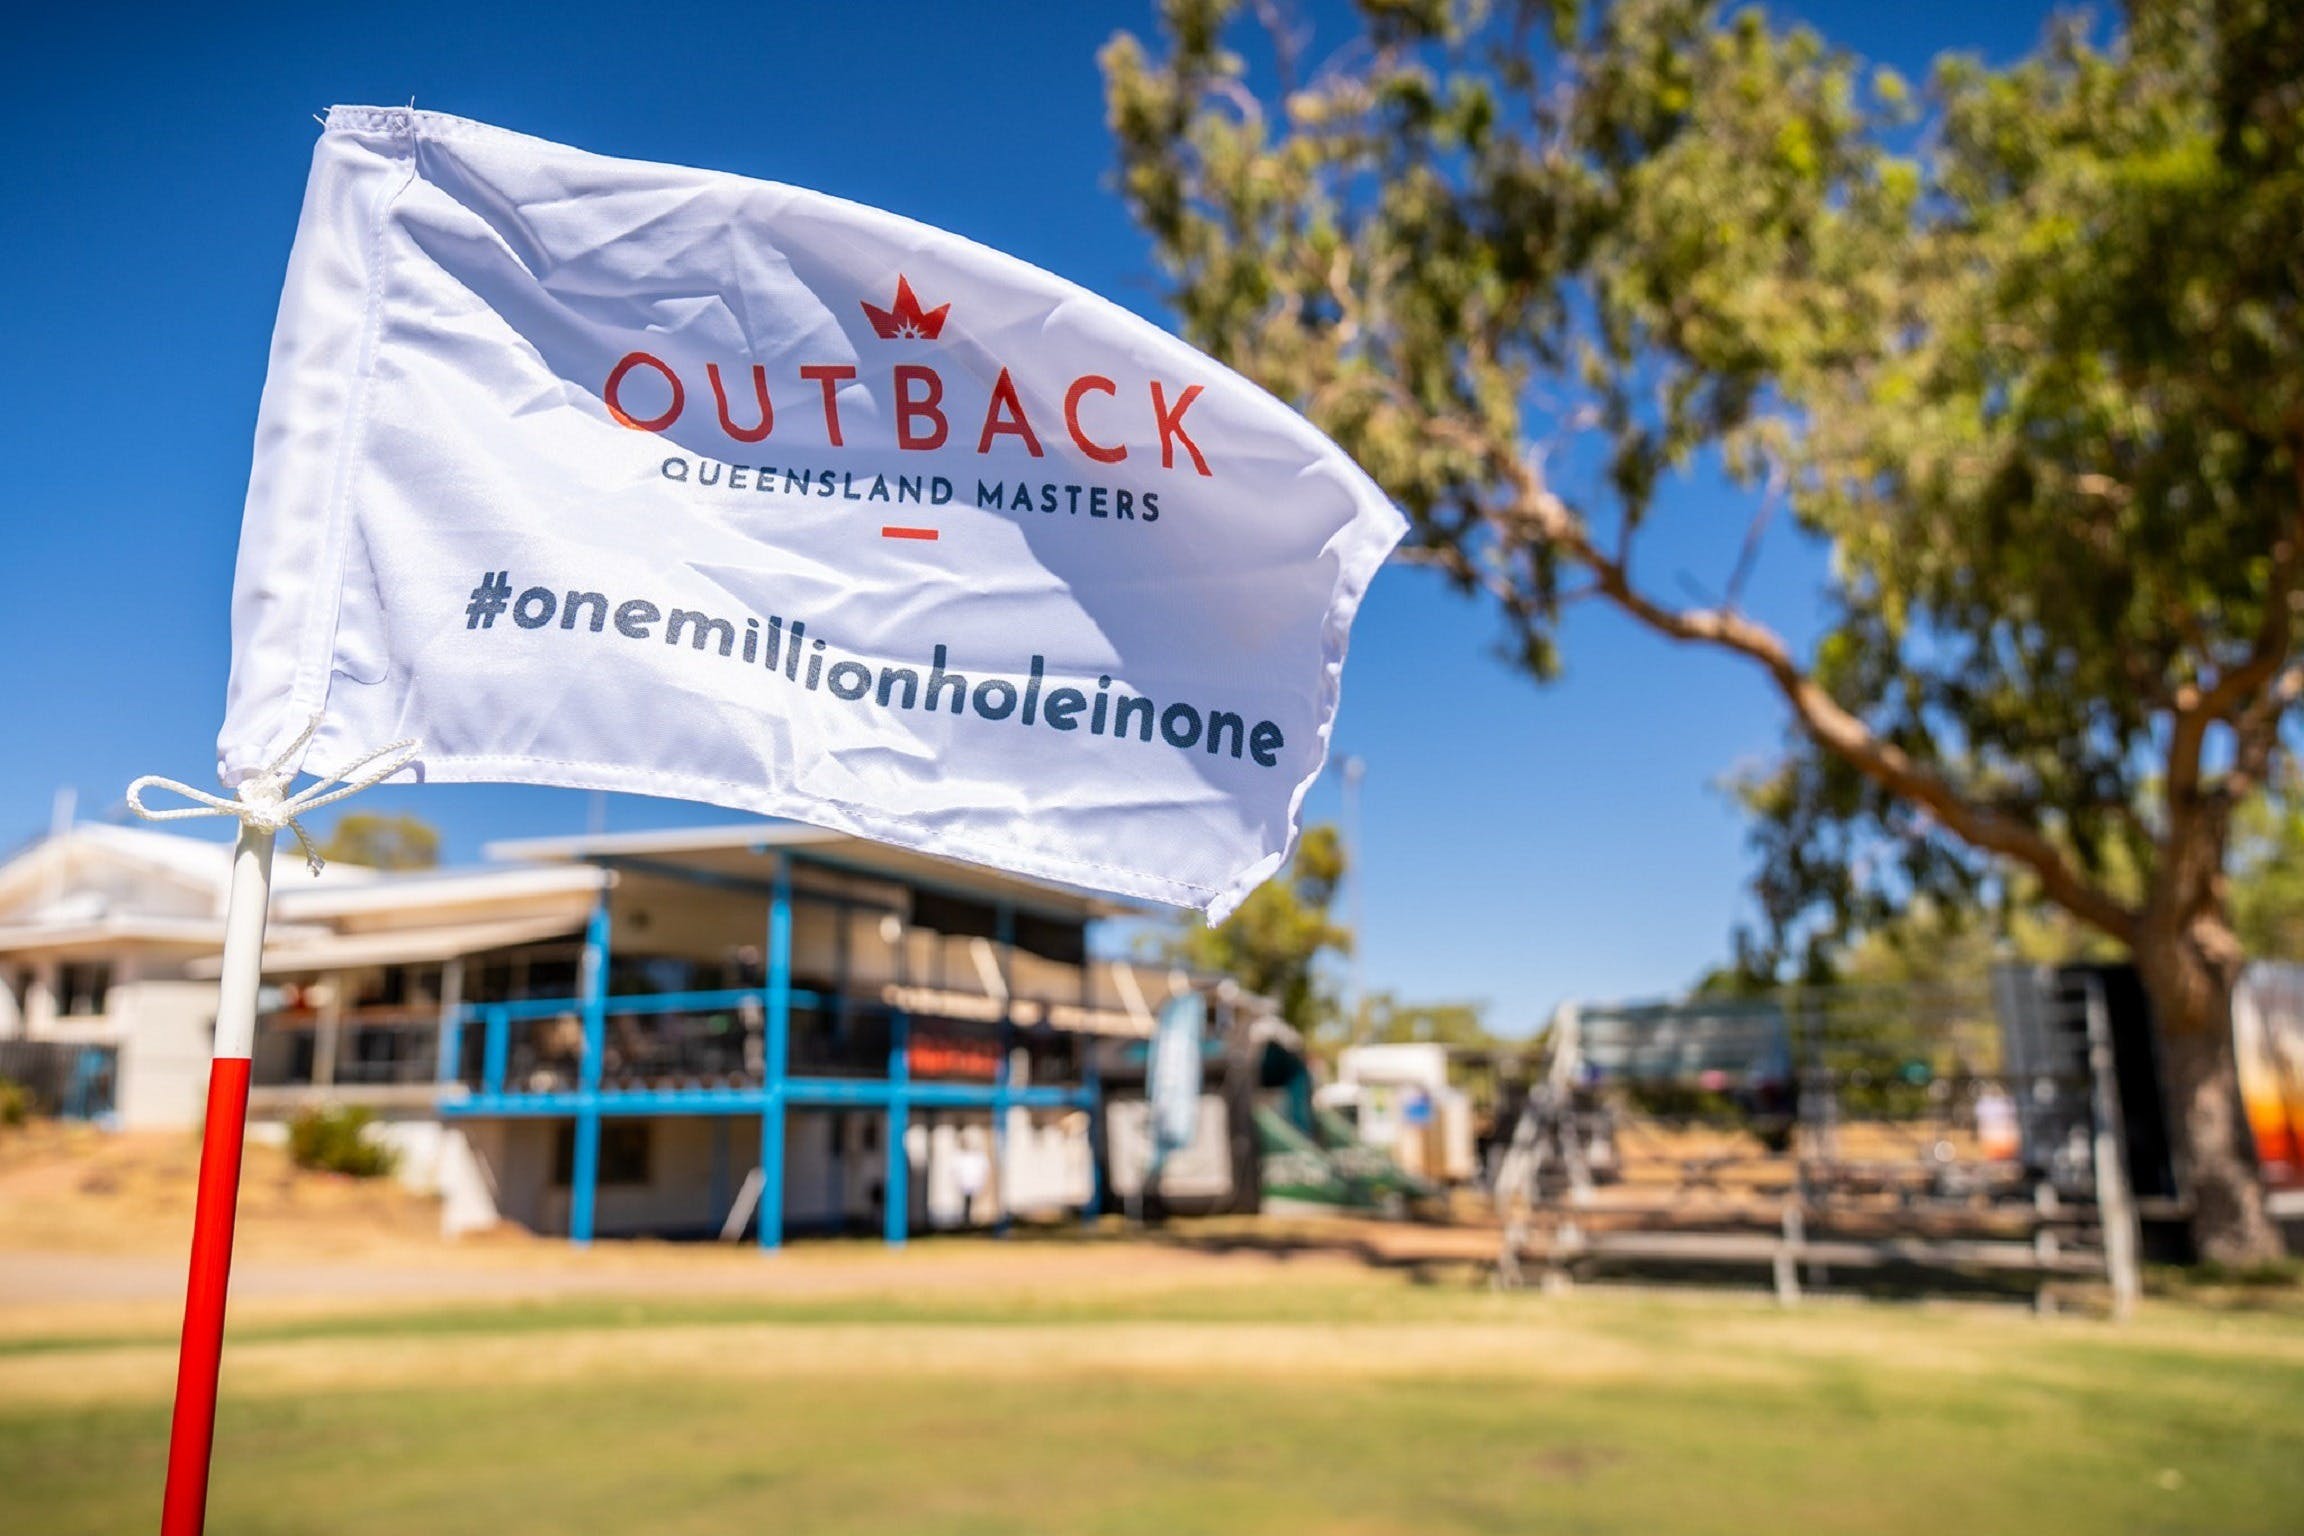 Outback Queensland Masters Charleville Leg 2021 - Lennox Head Accommodation